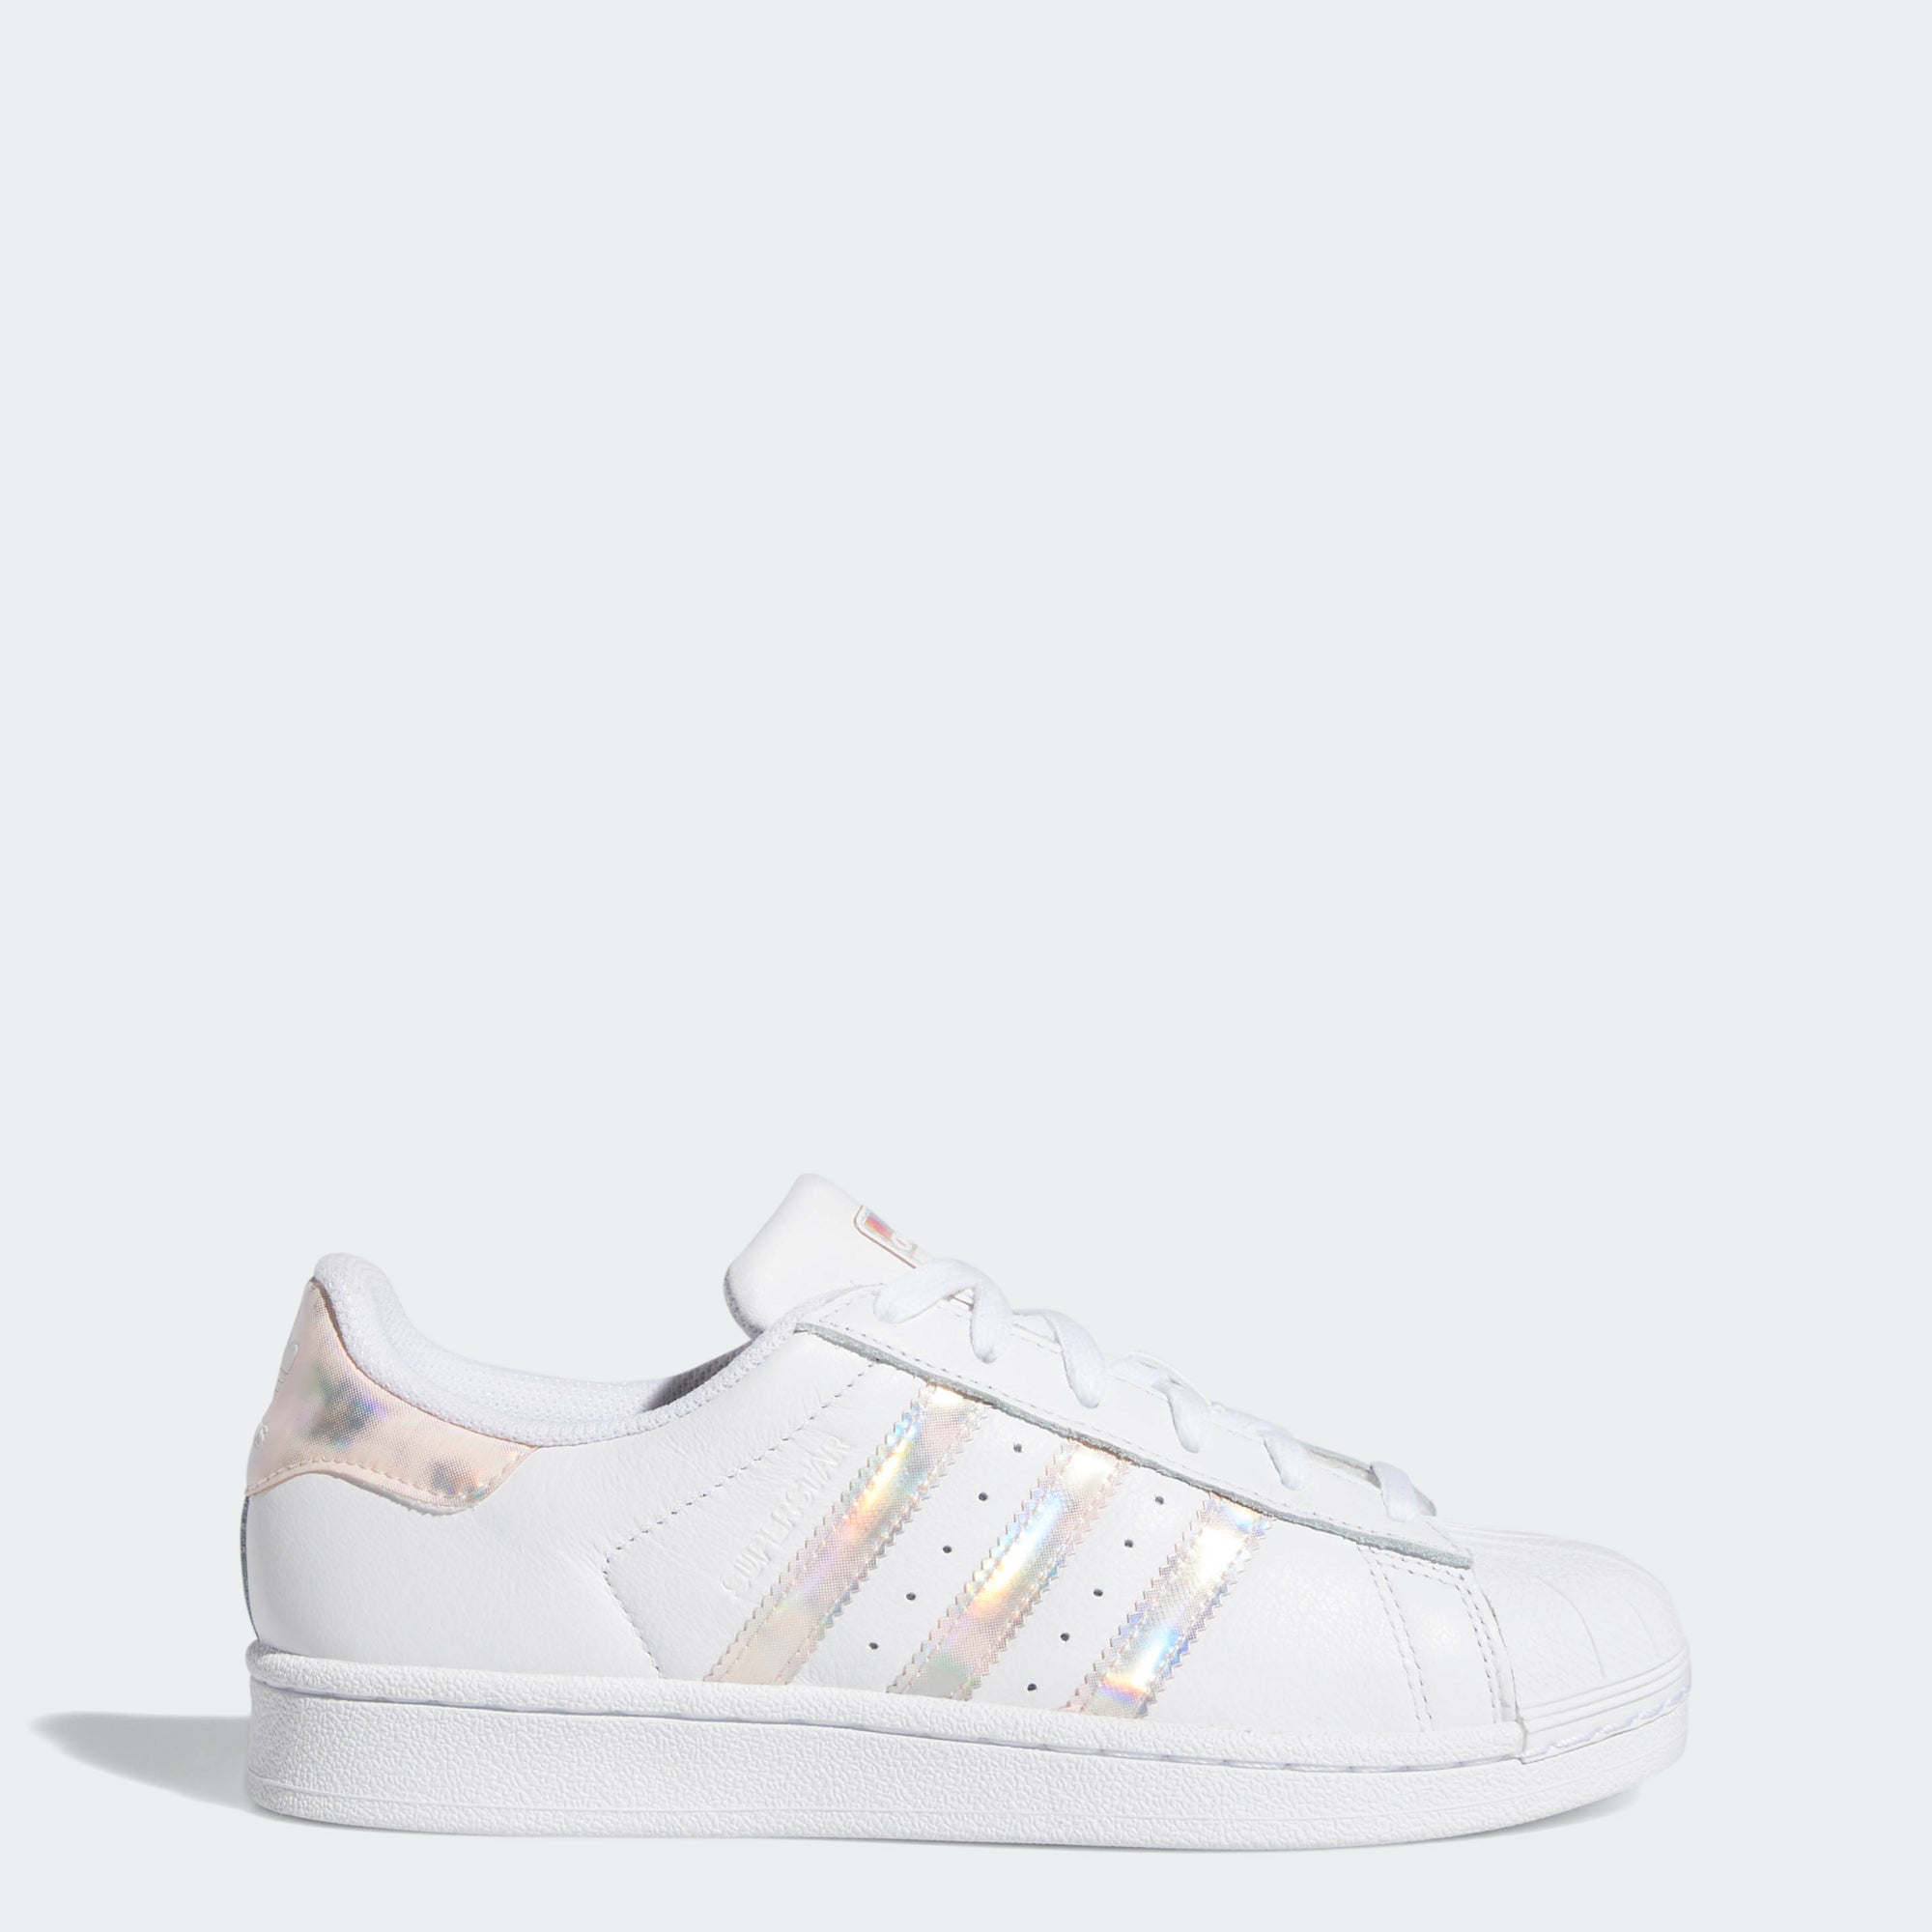 adidas Superstar Shoes White Reflective 